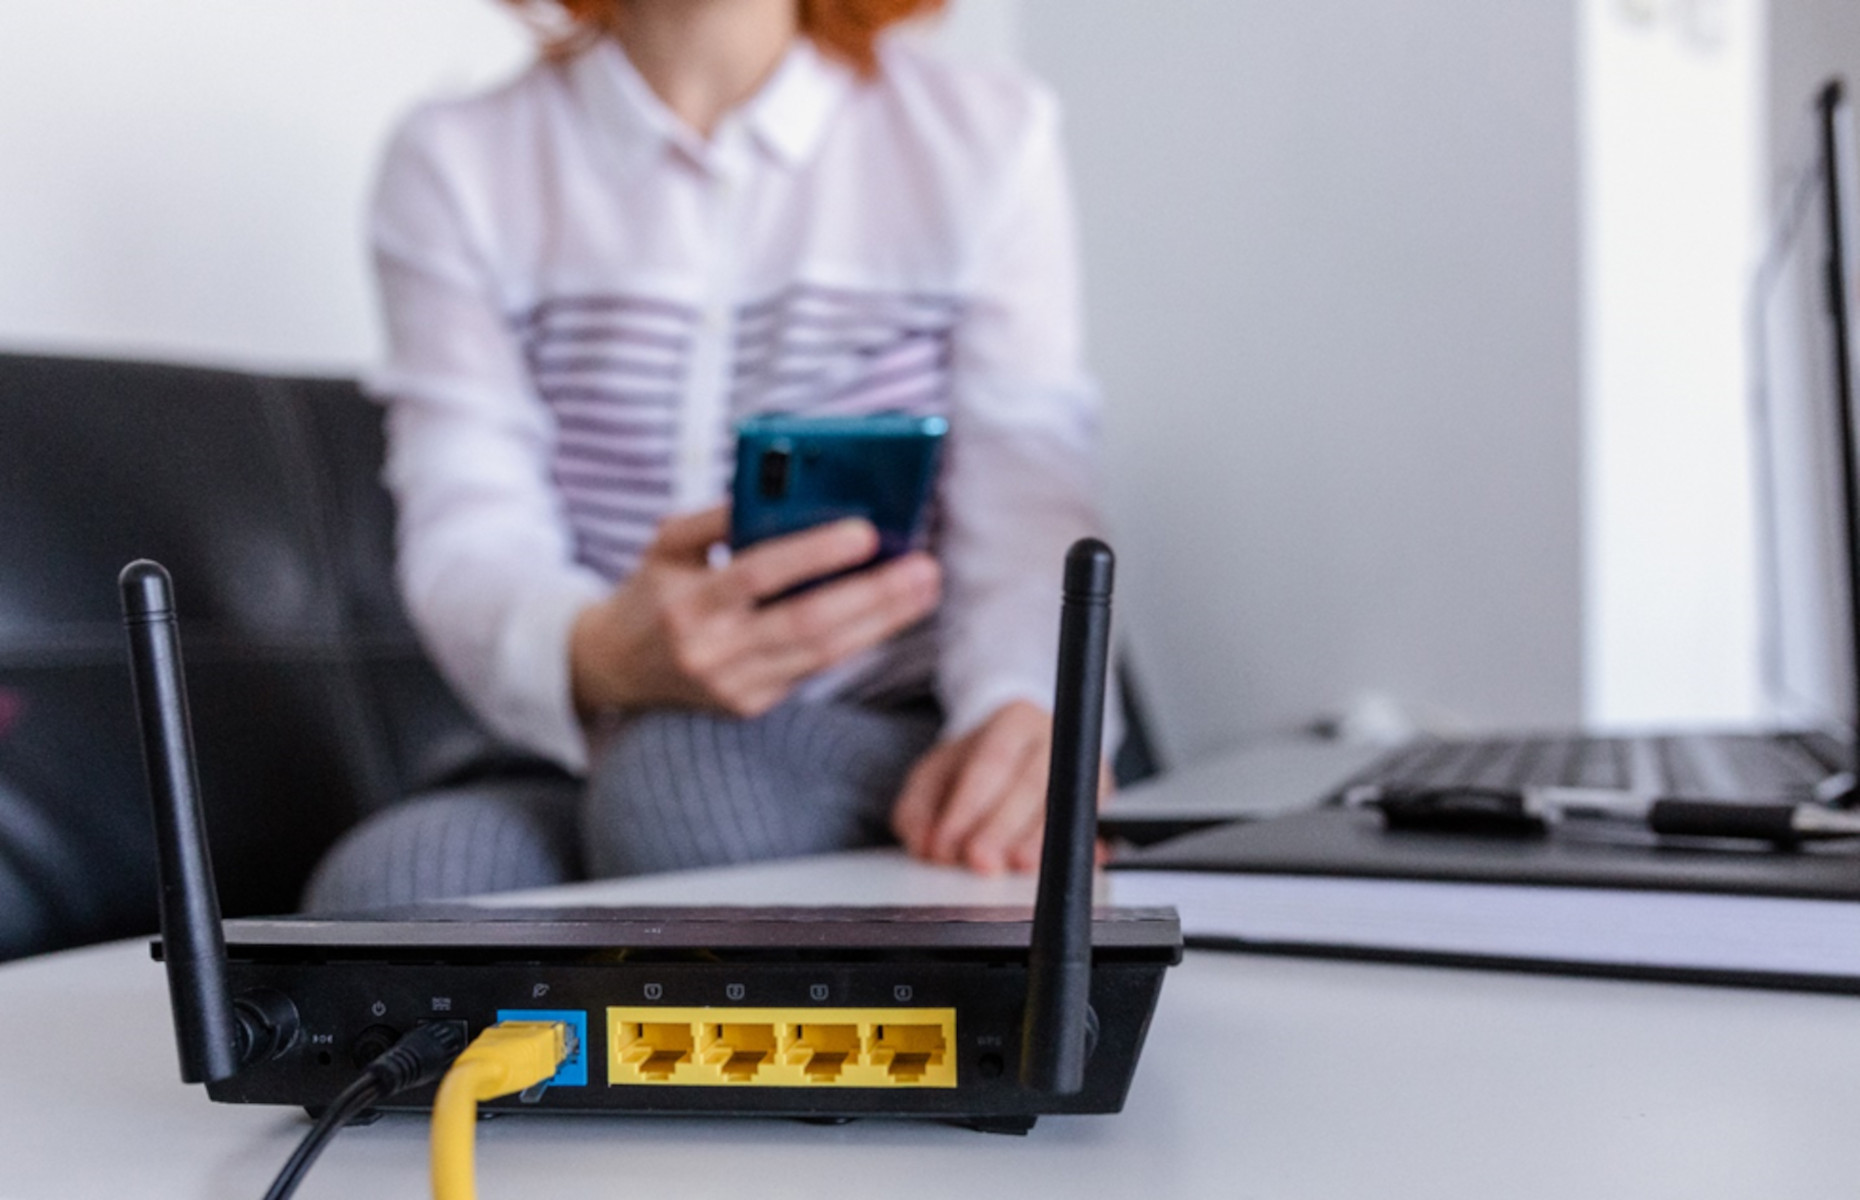 Work close to a home wifi router for best reception. Image: john snith / Shutterstock